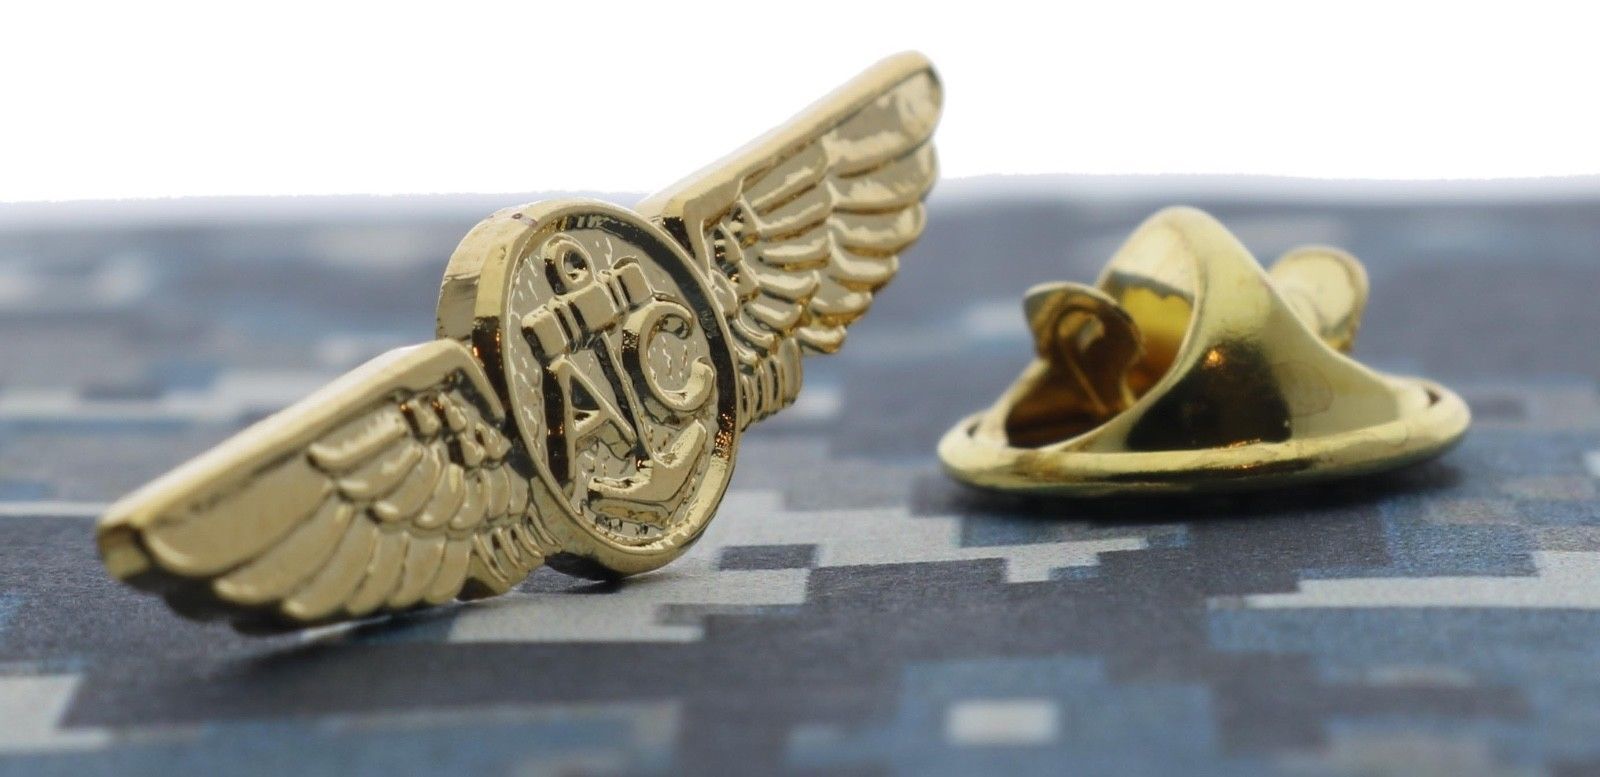 USN Navy Air Crew Wings Hat or Lapel Pin Gold Tone 1 1/4 inch EE15240G F3D18O